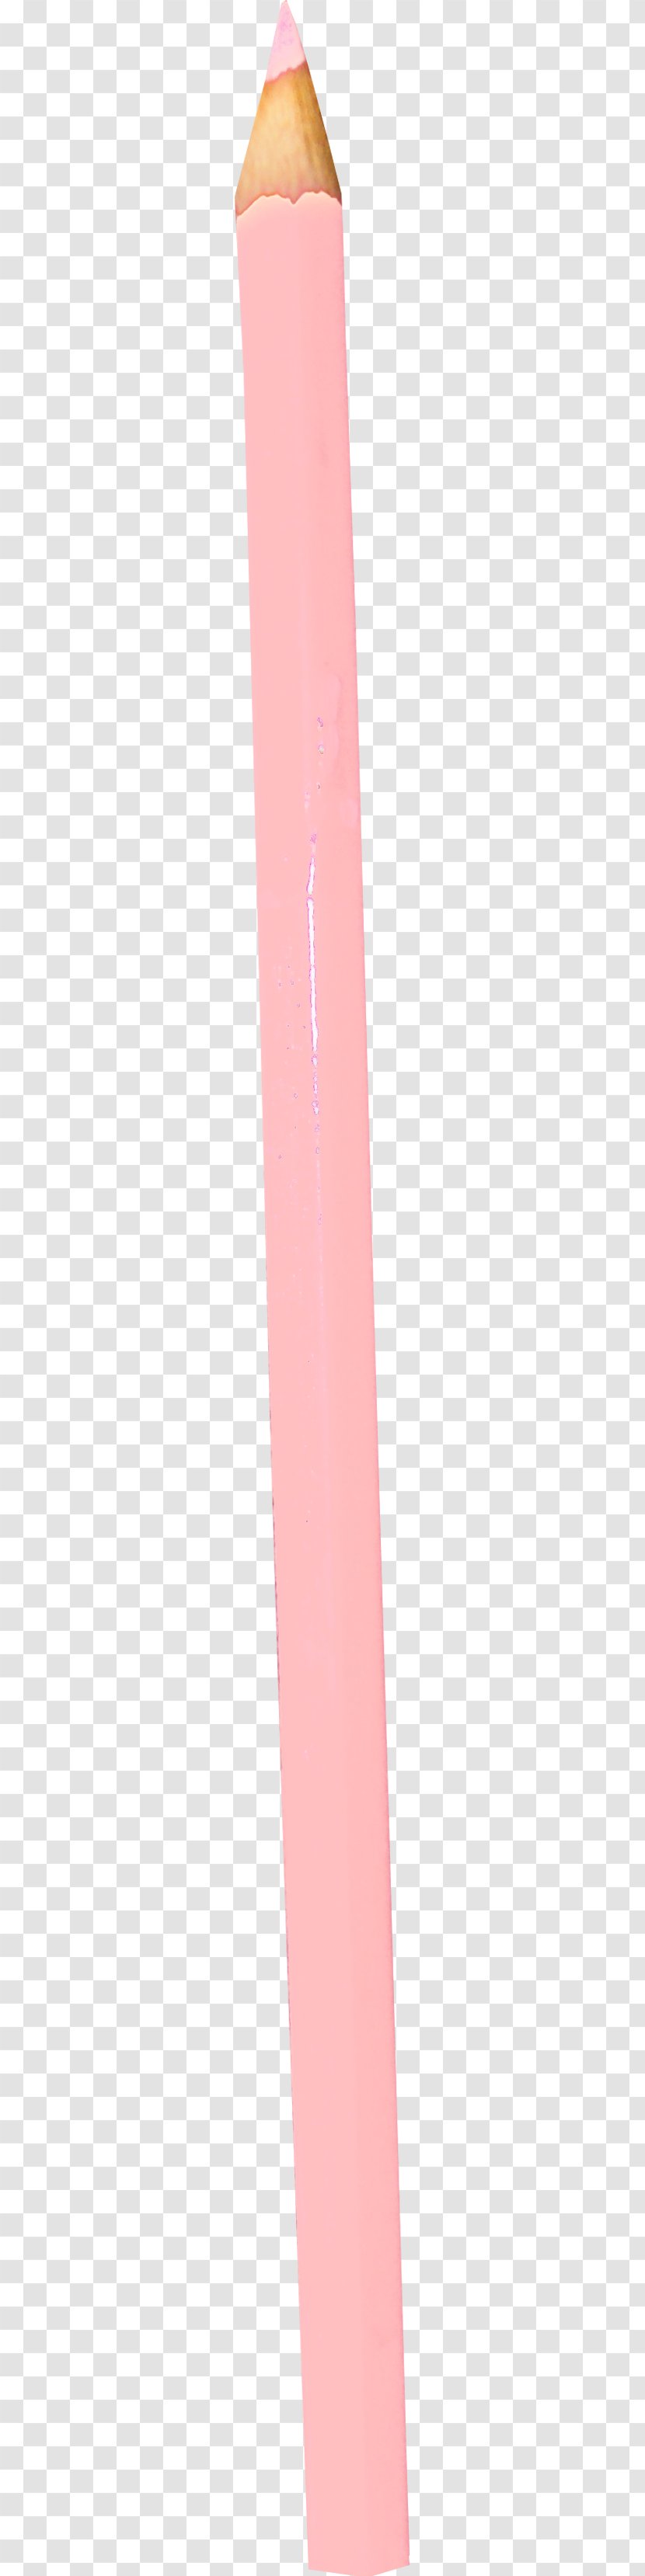 Angle - Pink - Pretty Pencil Transparent PNG